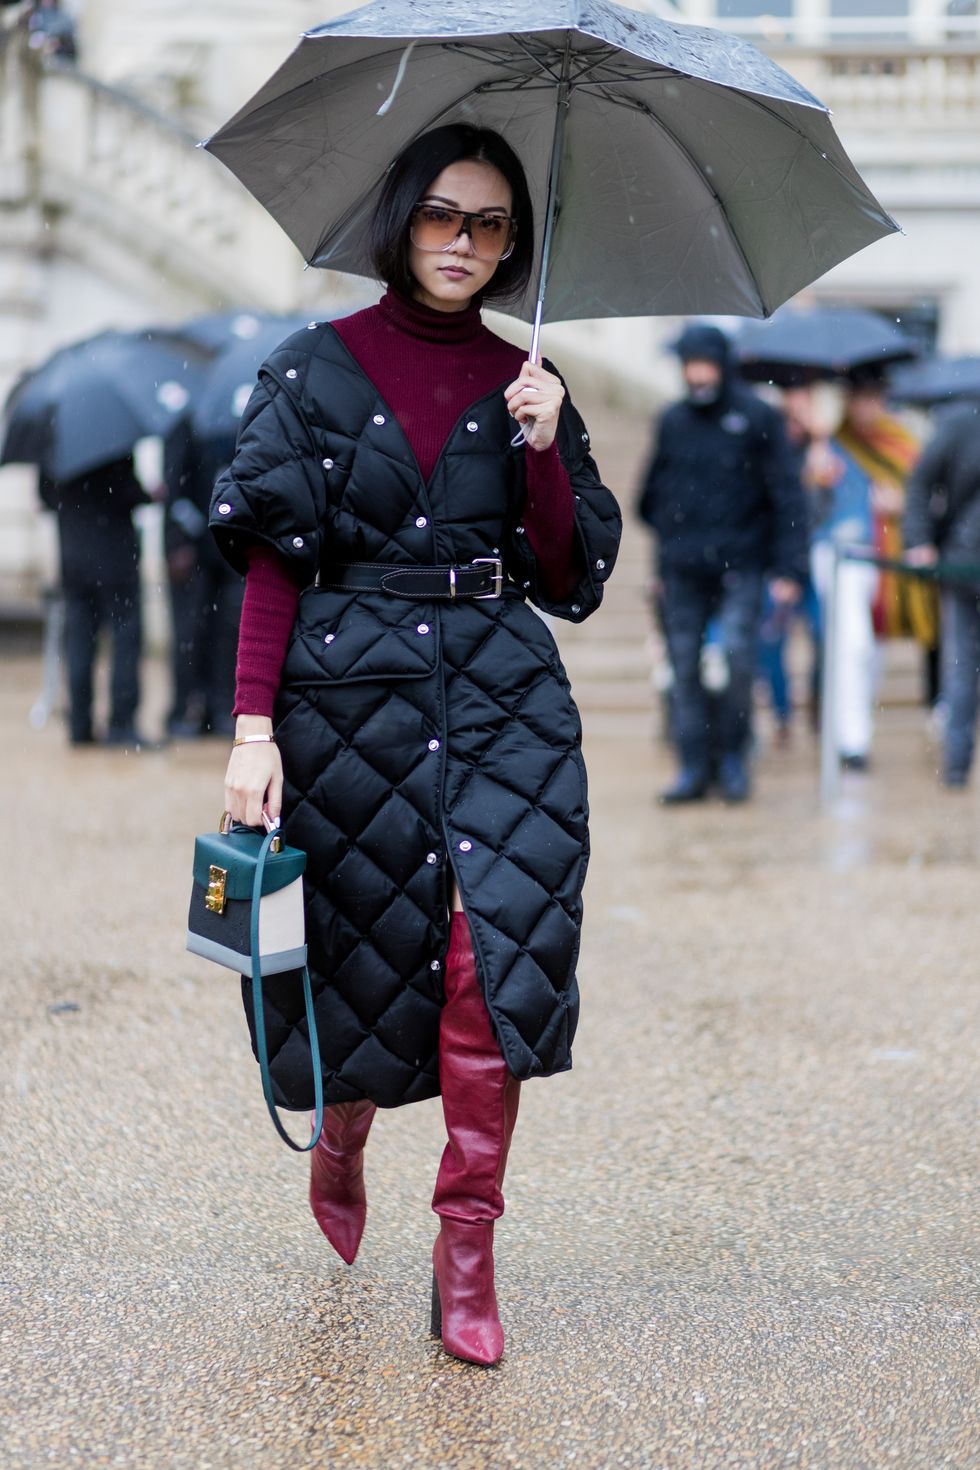 paris, france   march 06 yoyo cao wearing a black puffy coat, turtleneck, overknees outside stella mccartney on march 6, 2017 in paris, france photo by christian vieriggetty images